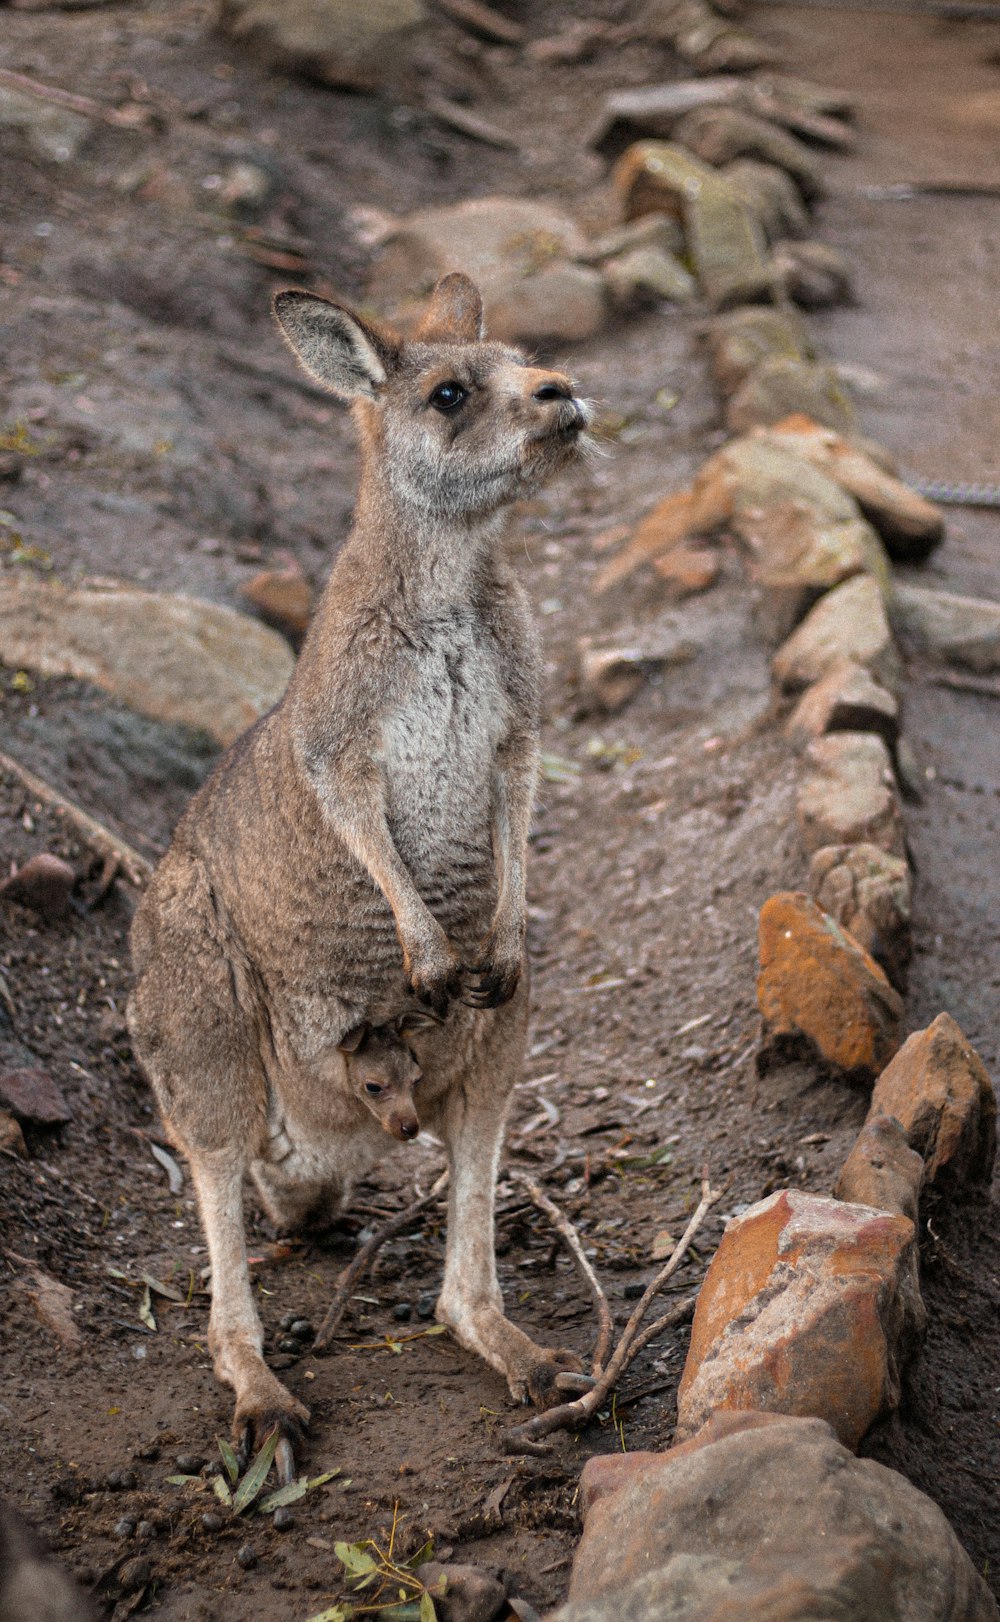 a kangaroo standing on its hind legs in the dirt